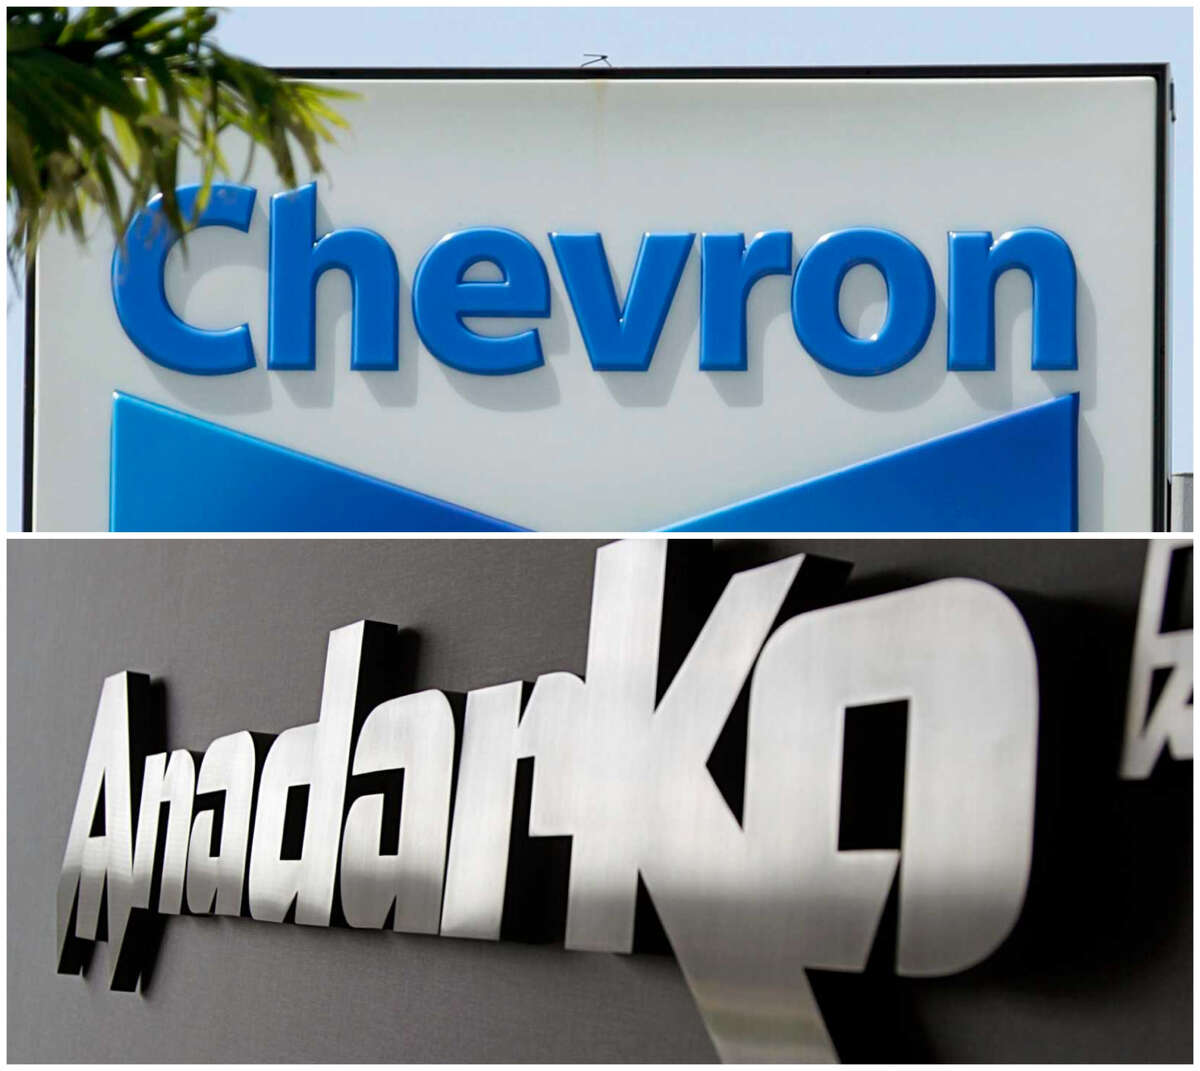 Chevron said on Friday, April 12, 2019, that it will buy Anadarko Petroleum for $33 billion in the biggest industry megadeal in years.